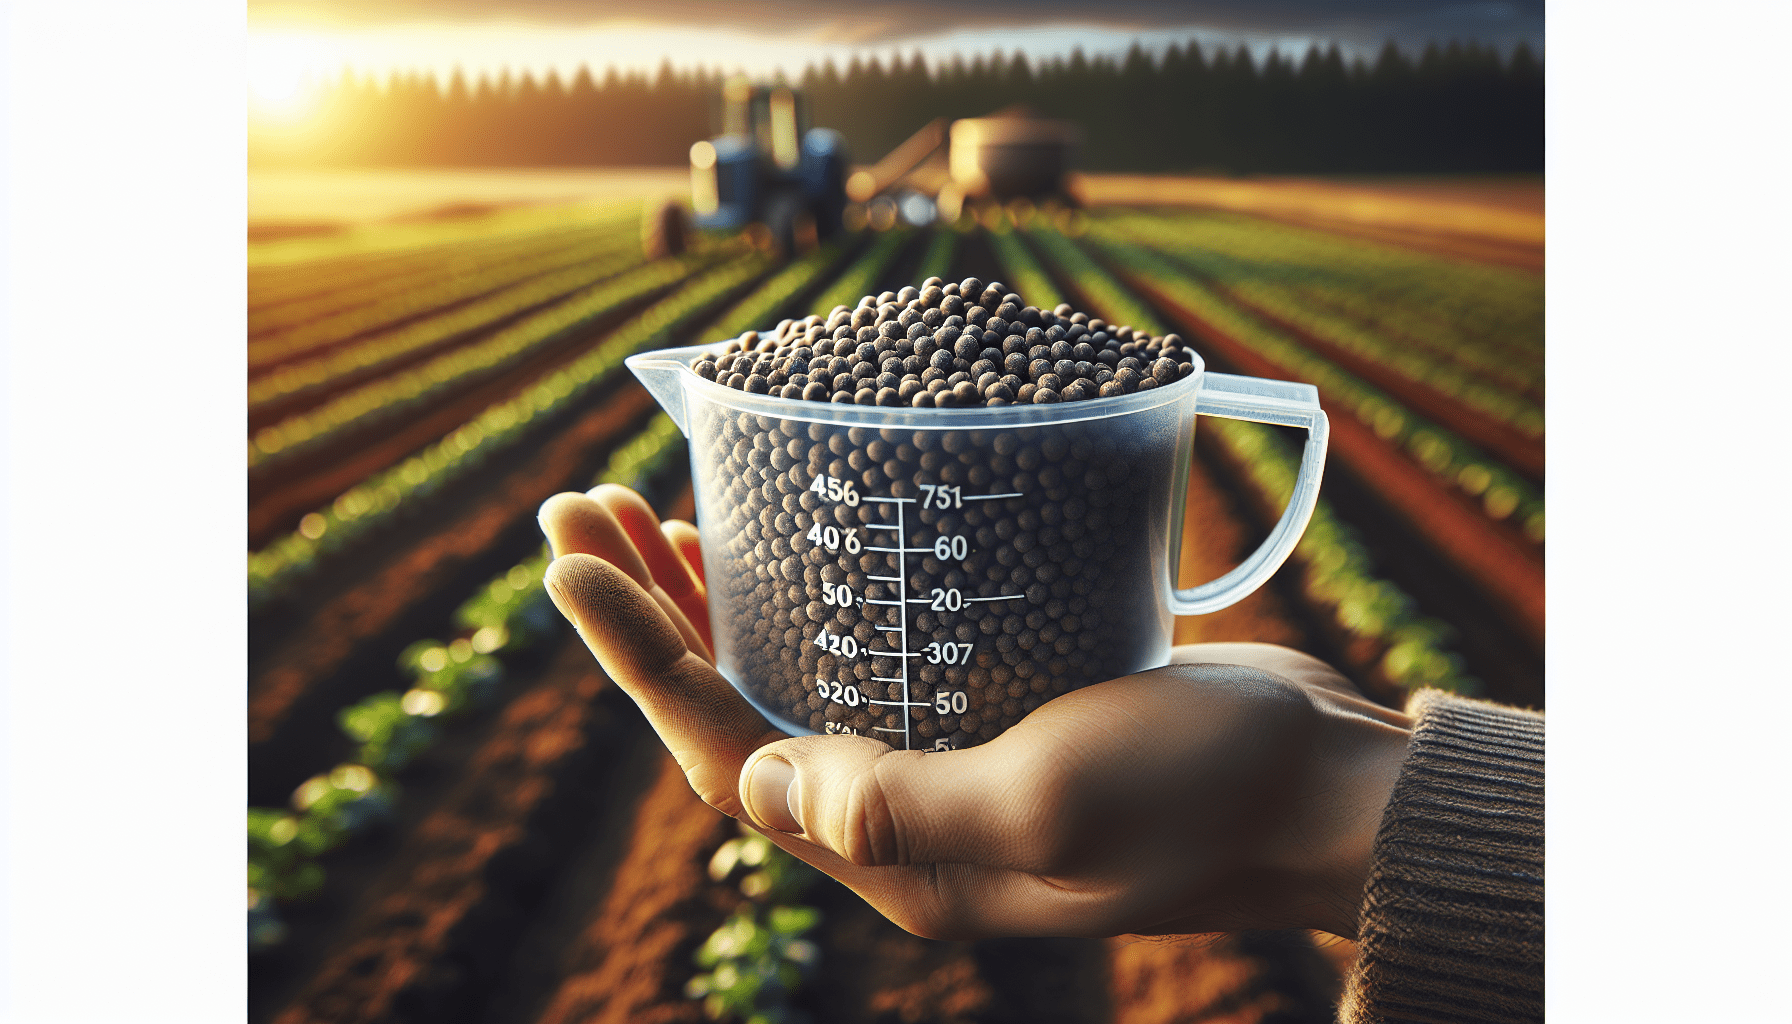 How To Calculate The Right Amount Of Fertilizer For Your Crops